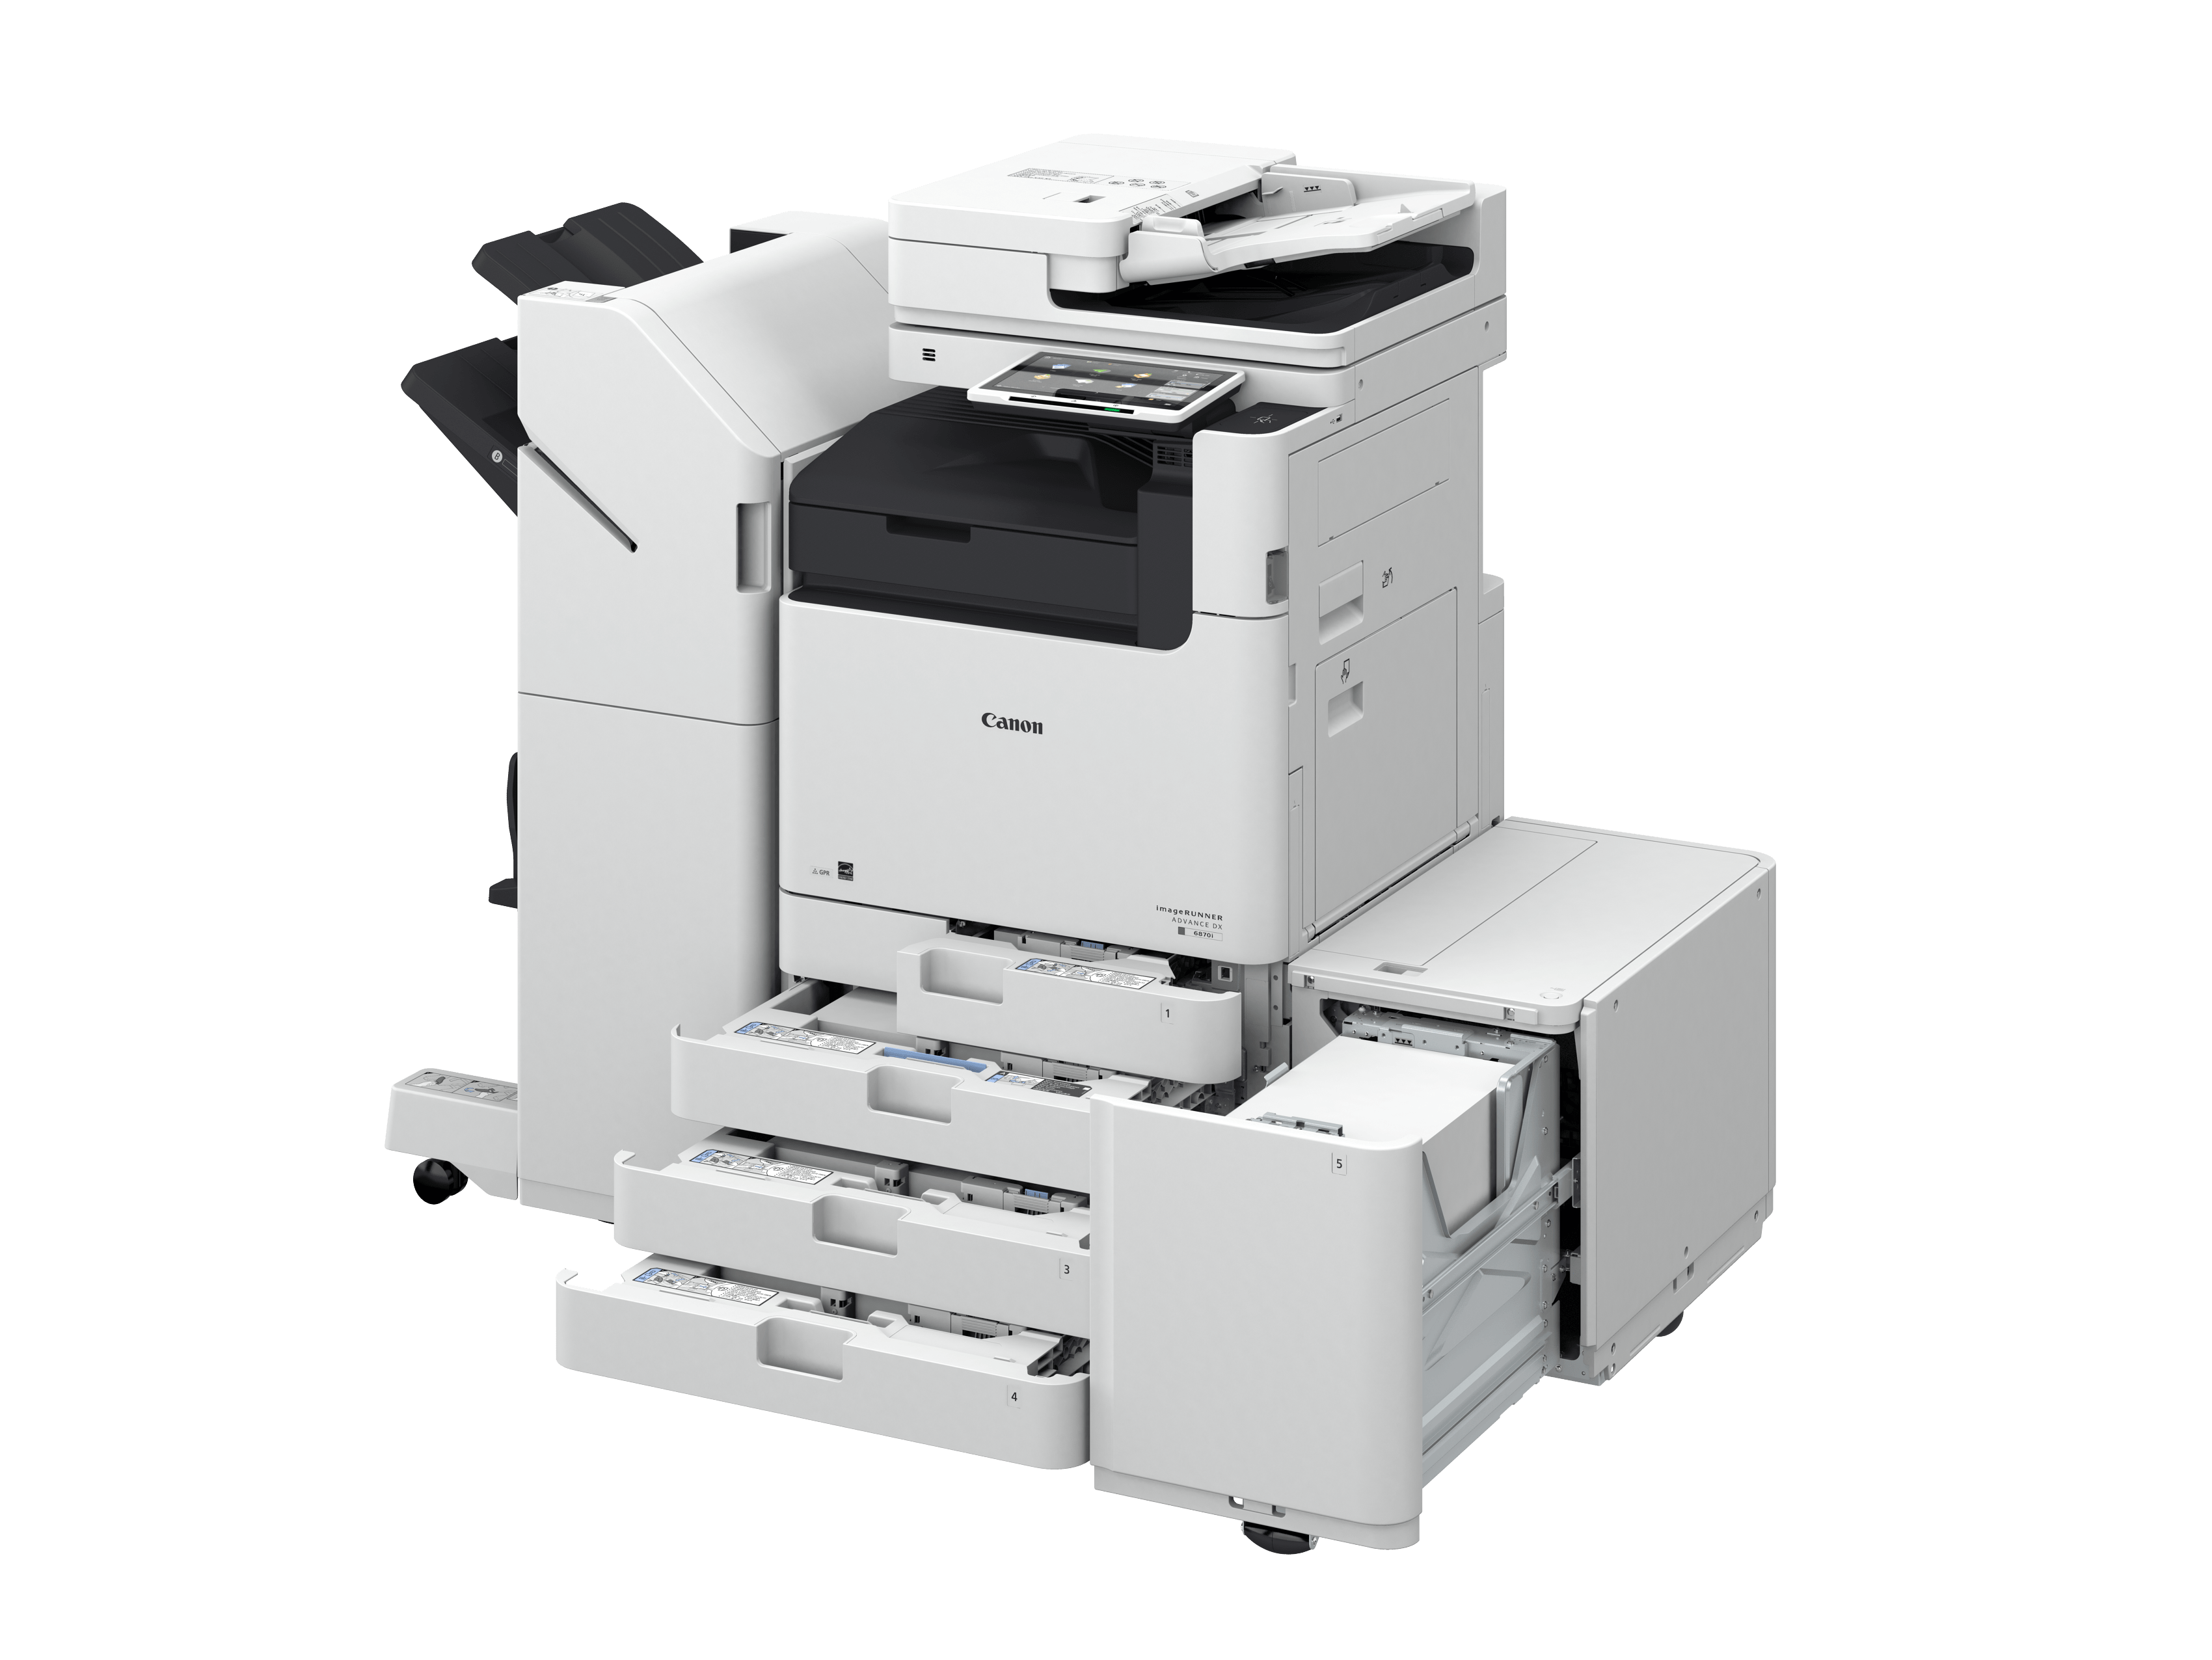 Absolute Toner New Repossessed Canon imageRUNNER ADVANCE DX 6860i Multifunction Black and White Business Printer and Copier Printers/Copiers